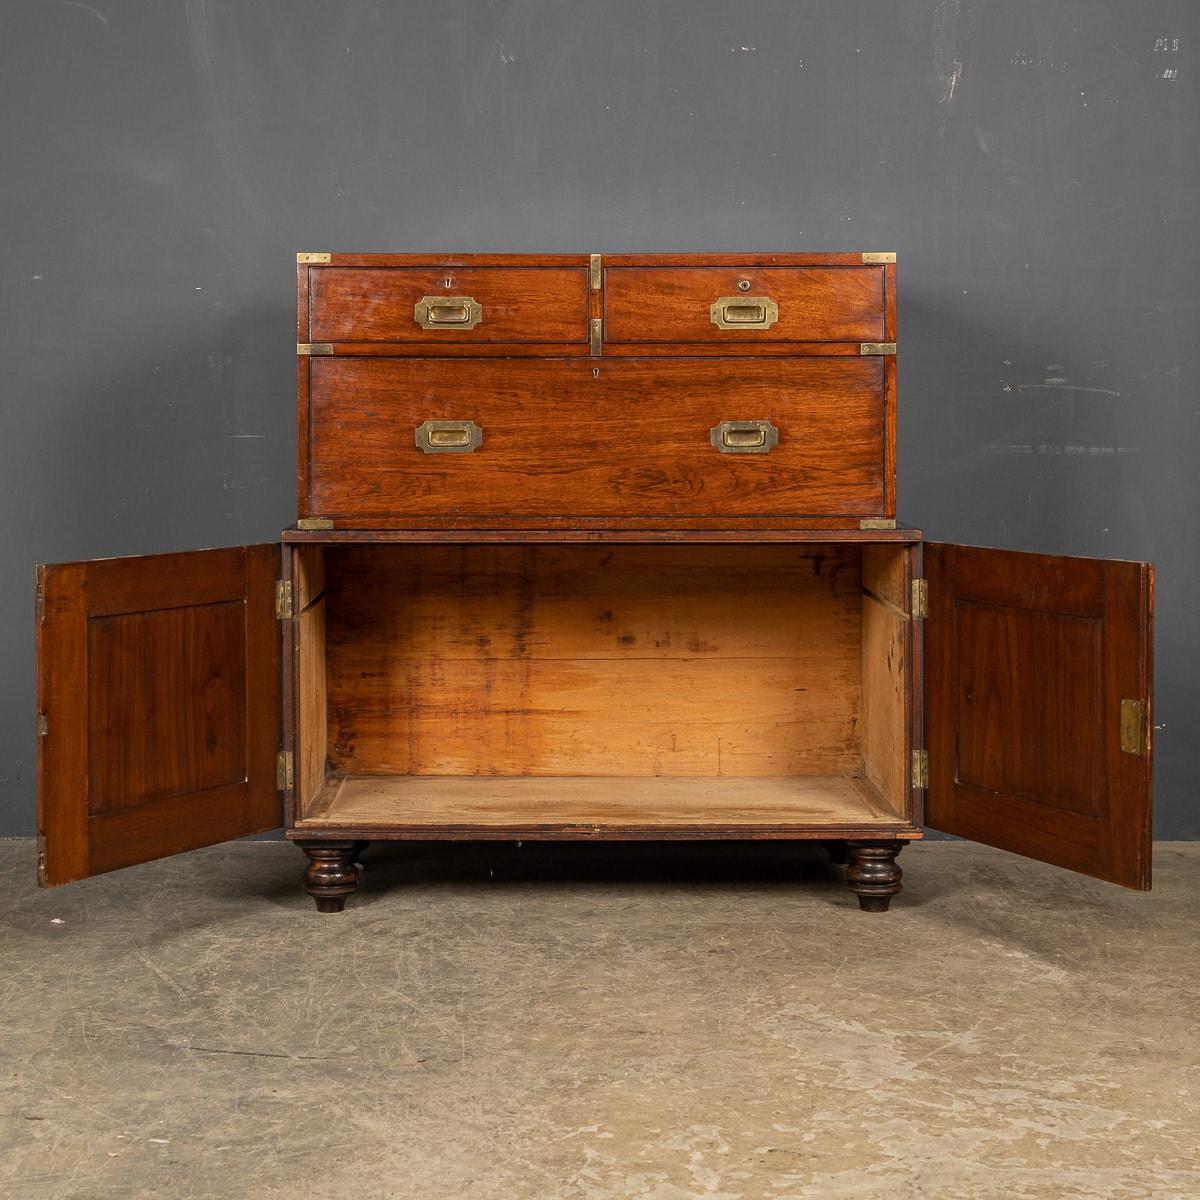 19th Century Victorian Solid Mahogany & Brass Campaign Dresser, c.1860 For Sale 1